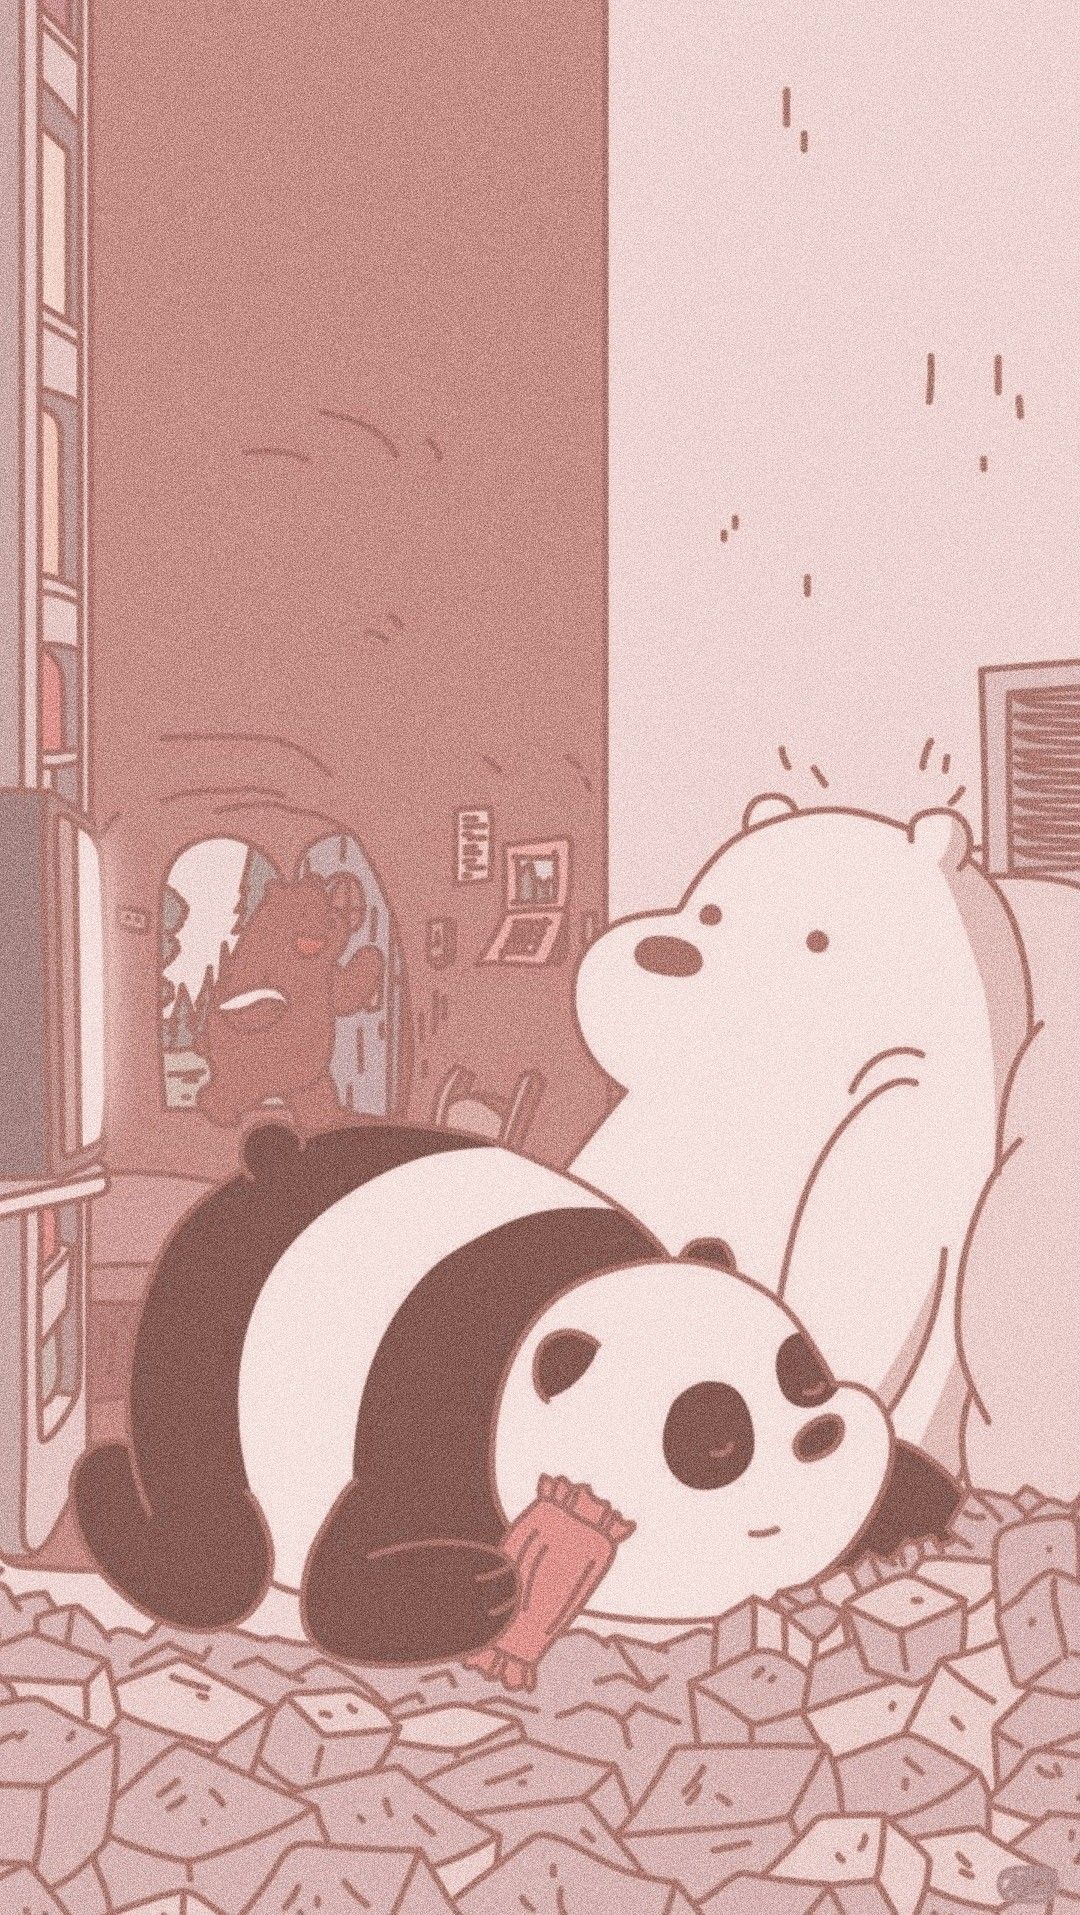 Ice Bear Aesthetic Wallpapers Wallpaper Cave